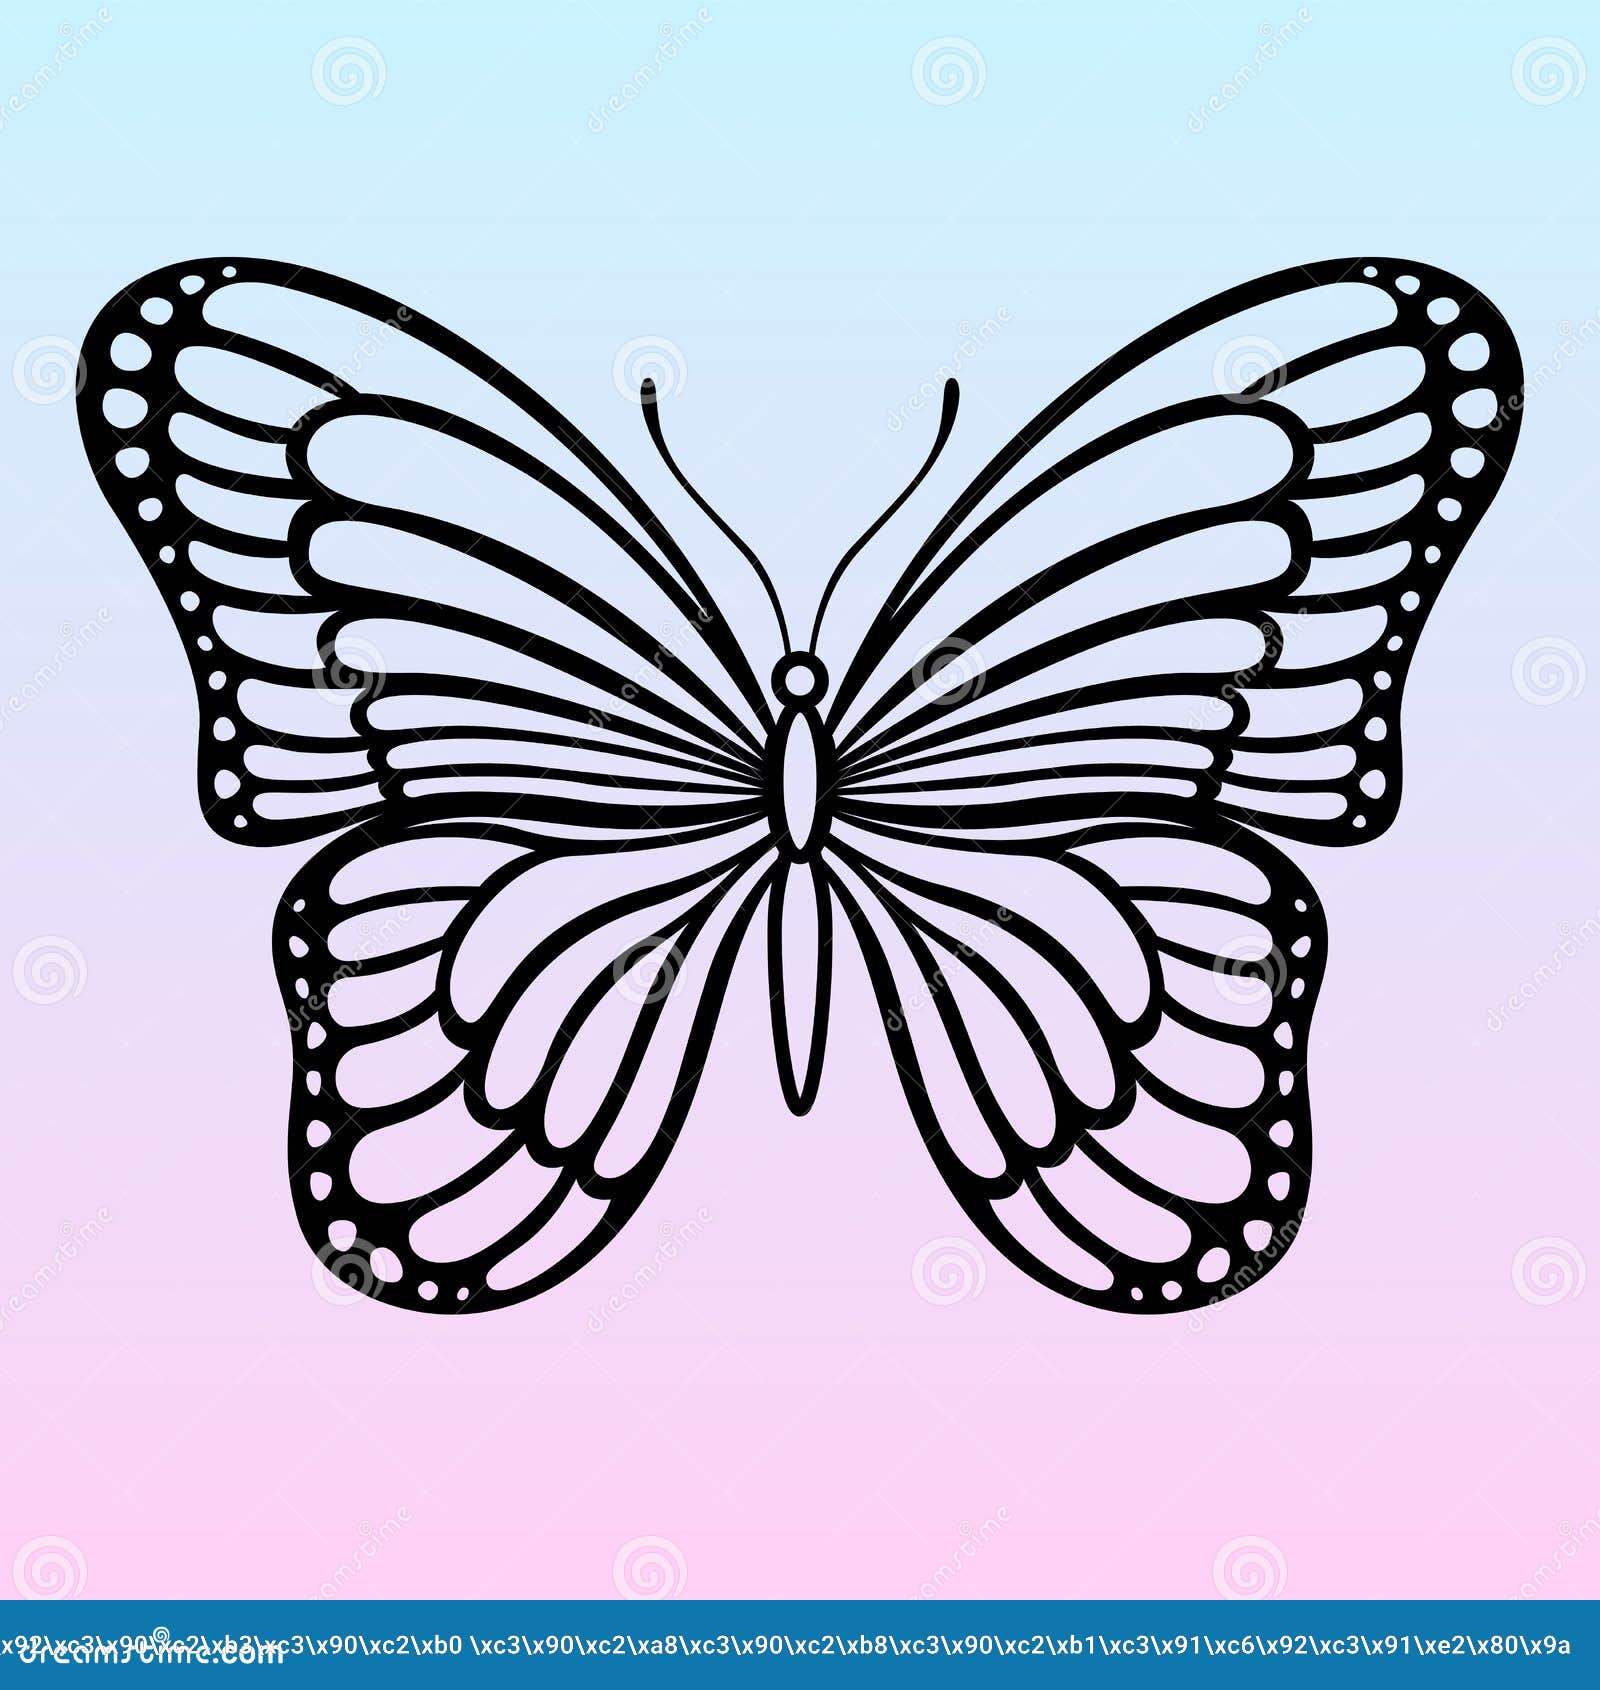 vector butterfly insect black silhouette template for laser and paper cutting stock vector illustration of flat decorative 215538835